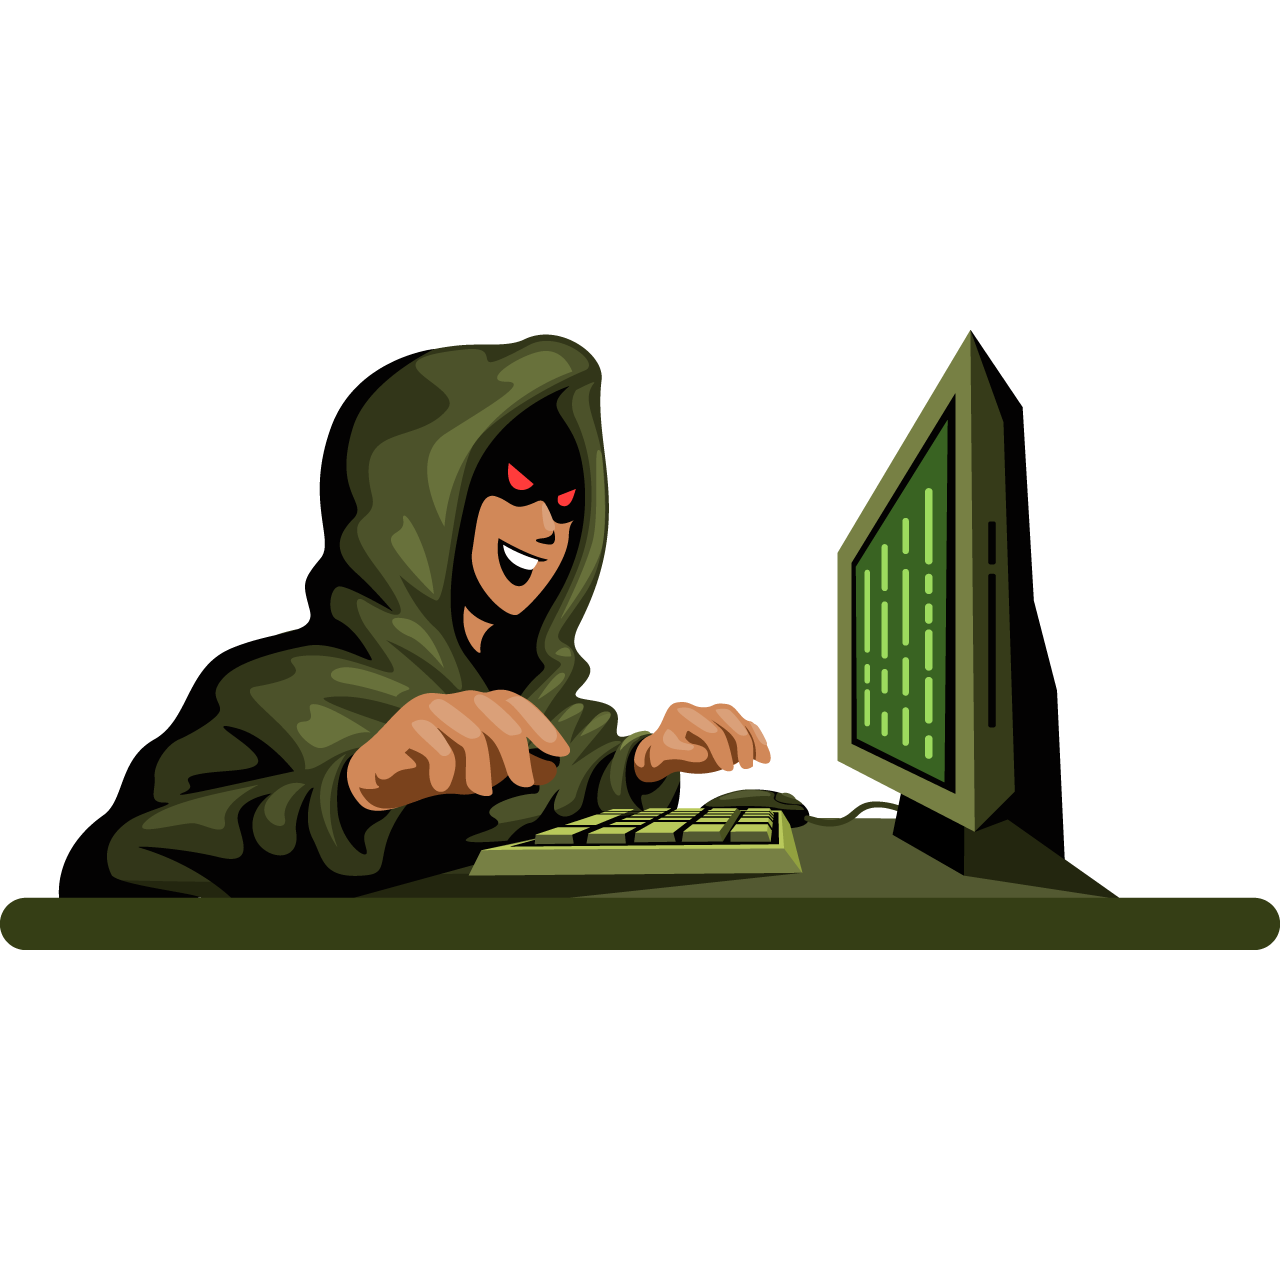 Hacker wear hoodie using computer character illustration transparent background image